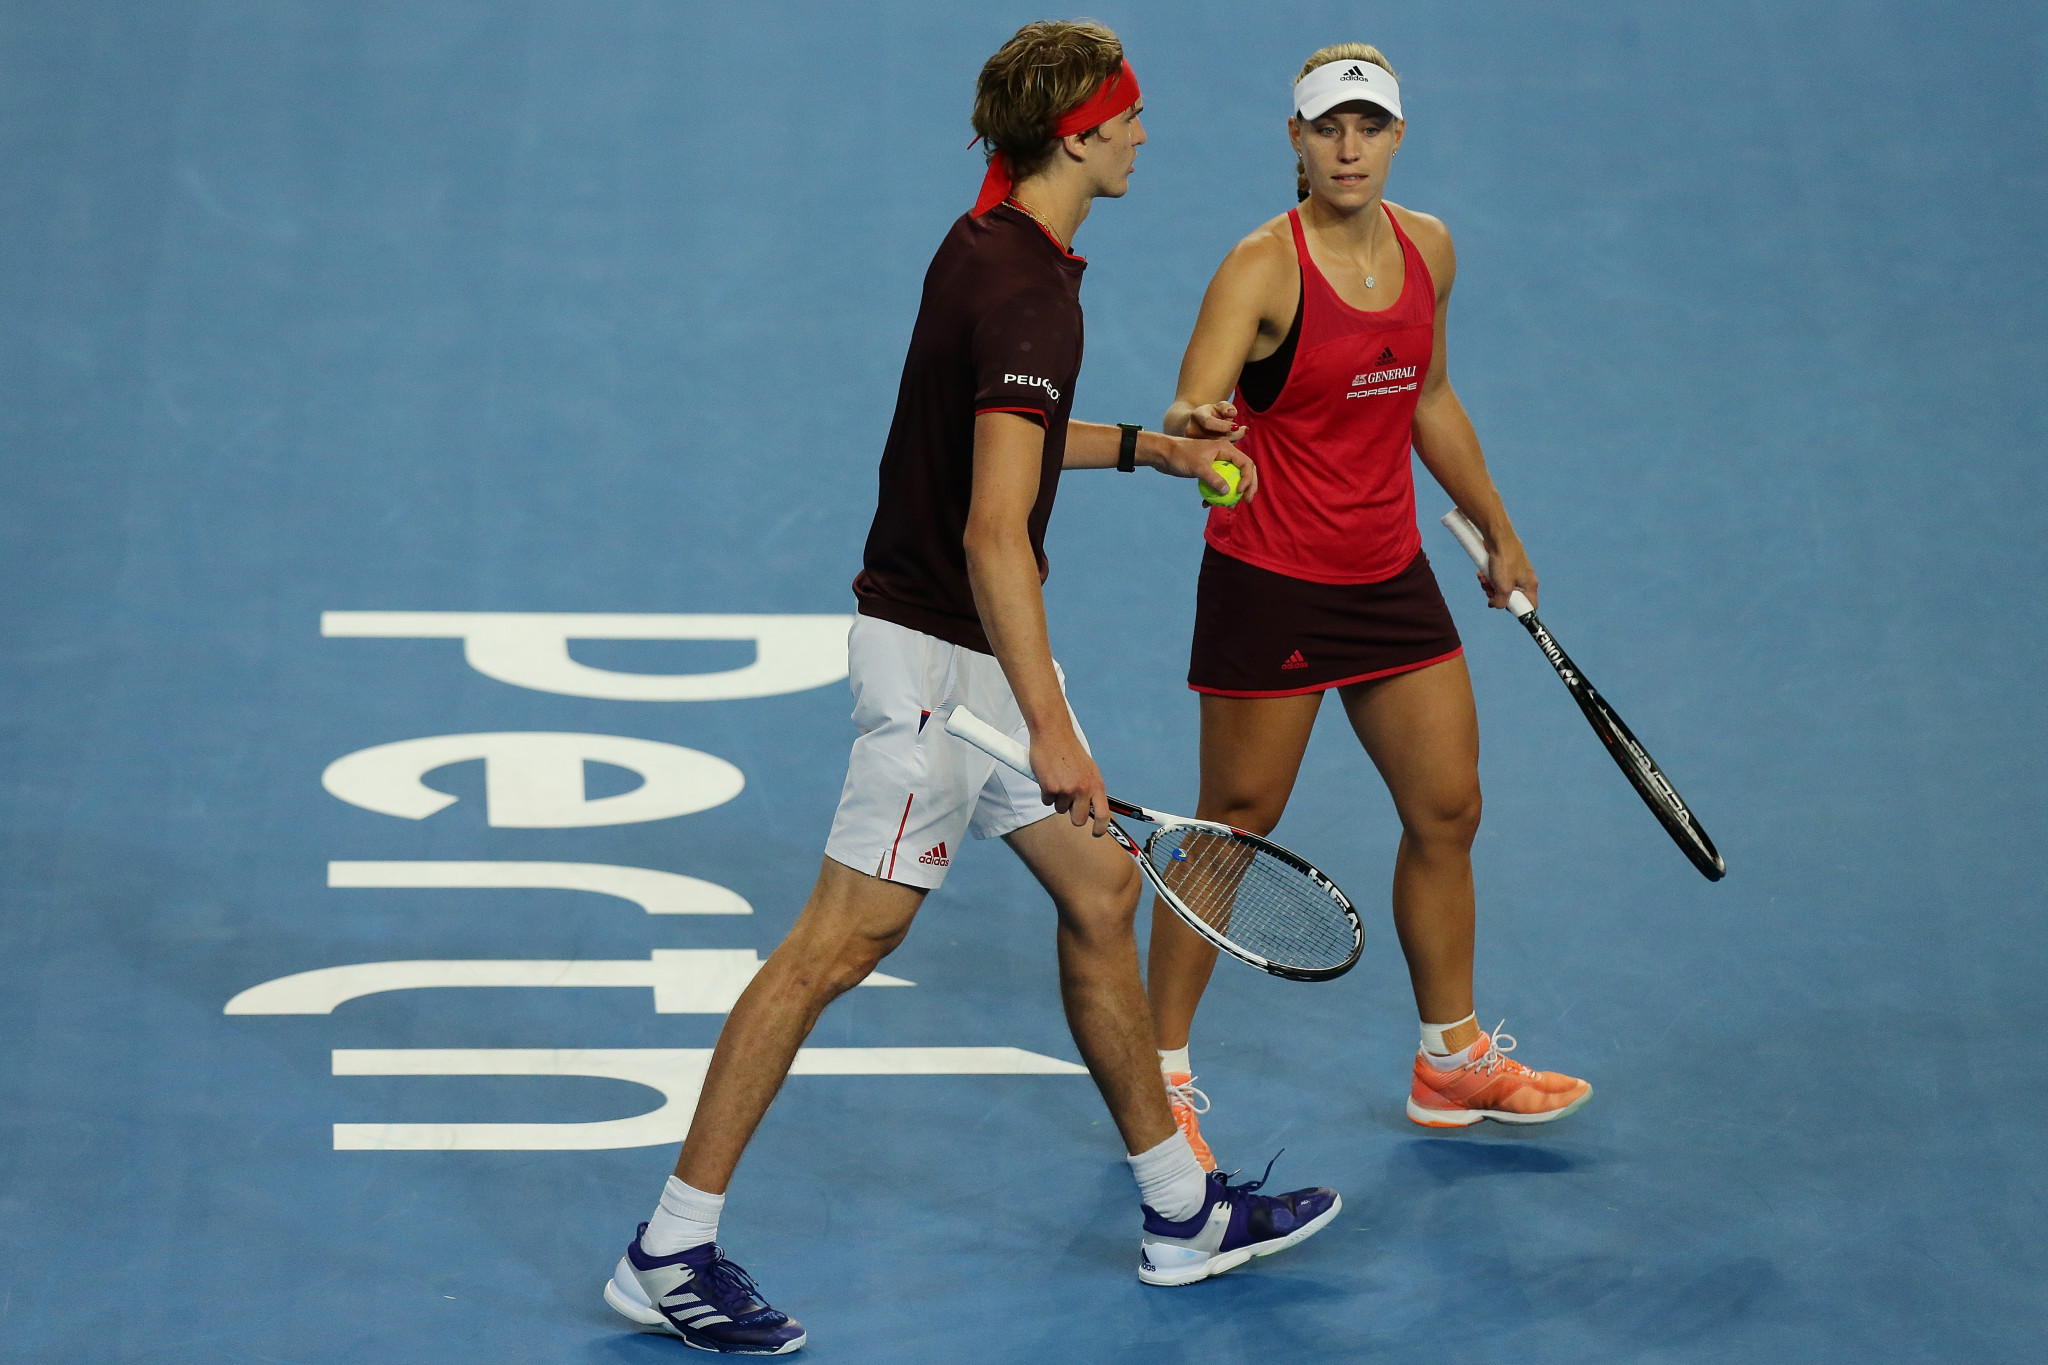 Zverev and Kerber will now face Federer and Bencic in tomorrow's Hopman Cup final ©Getty Images